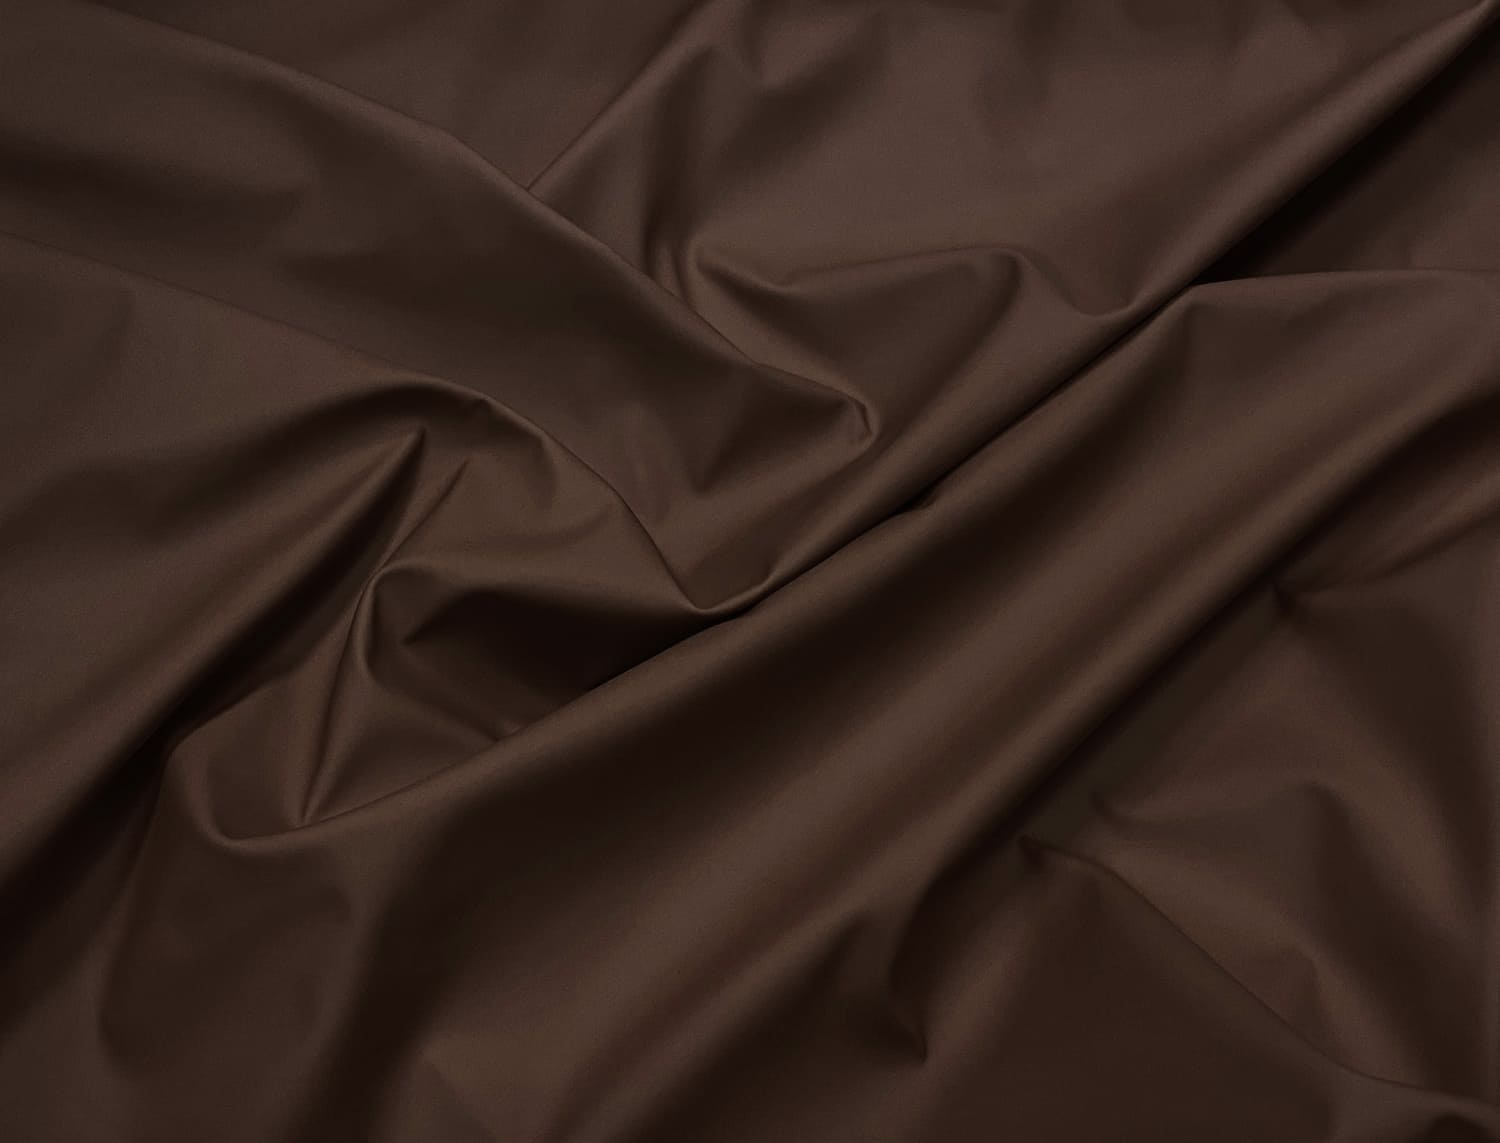 Stretchy Soft Faux Leather Fabric Material - BROWN